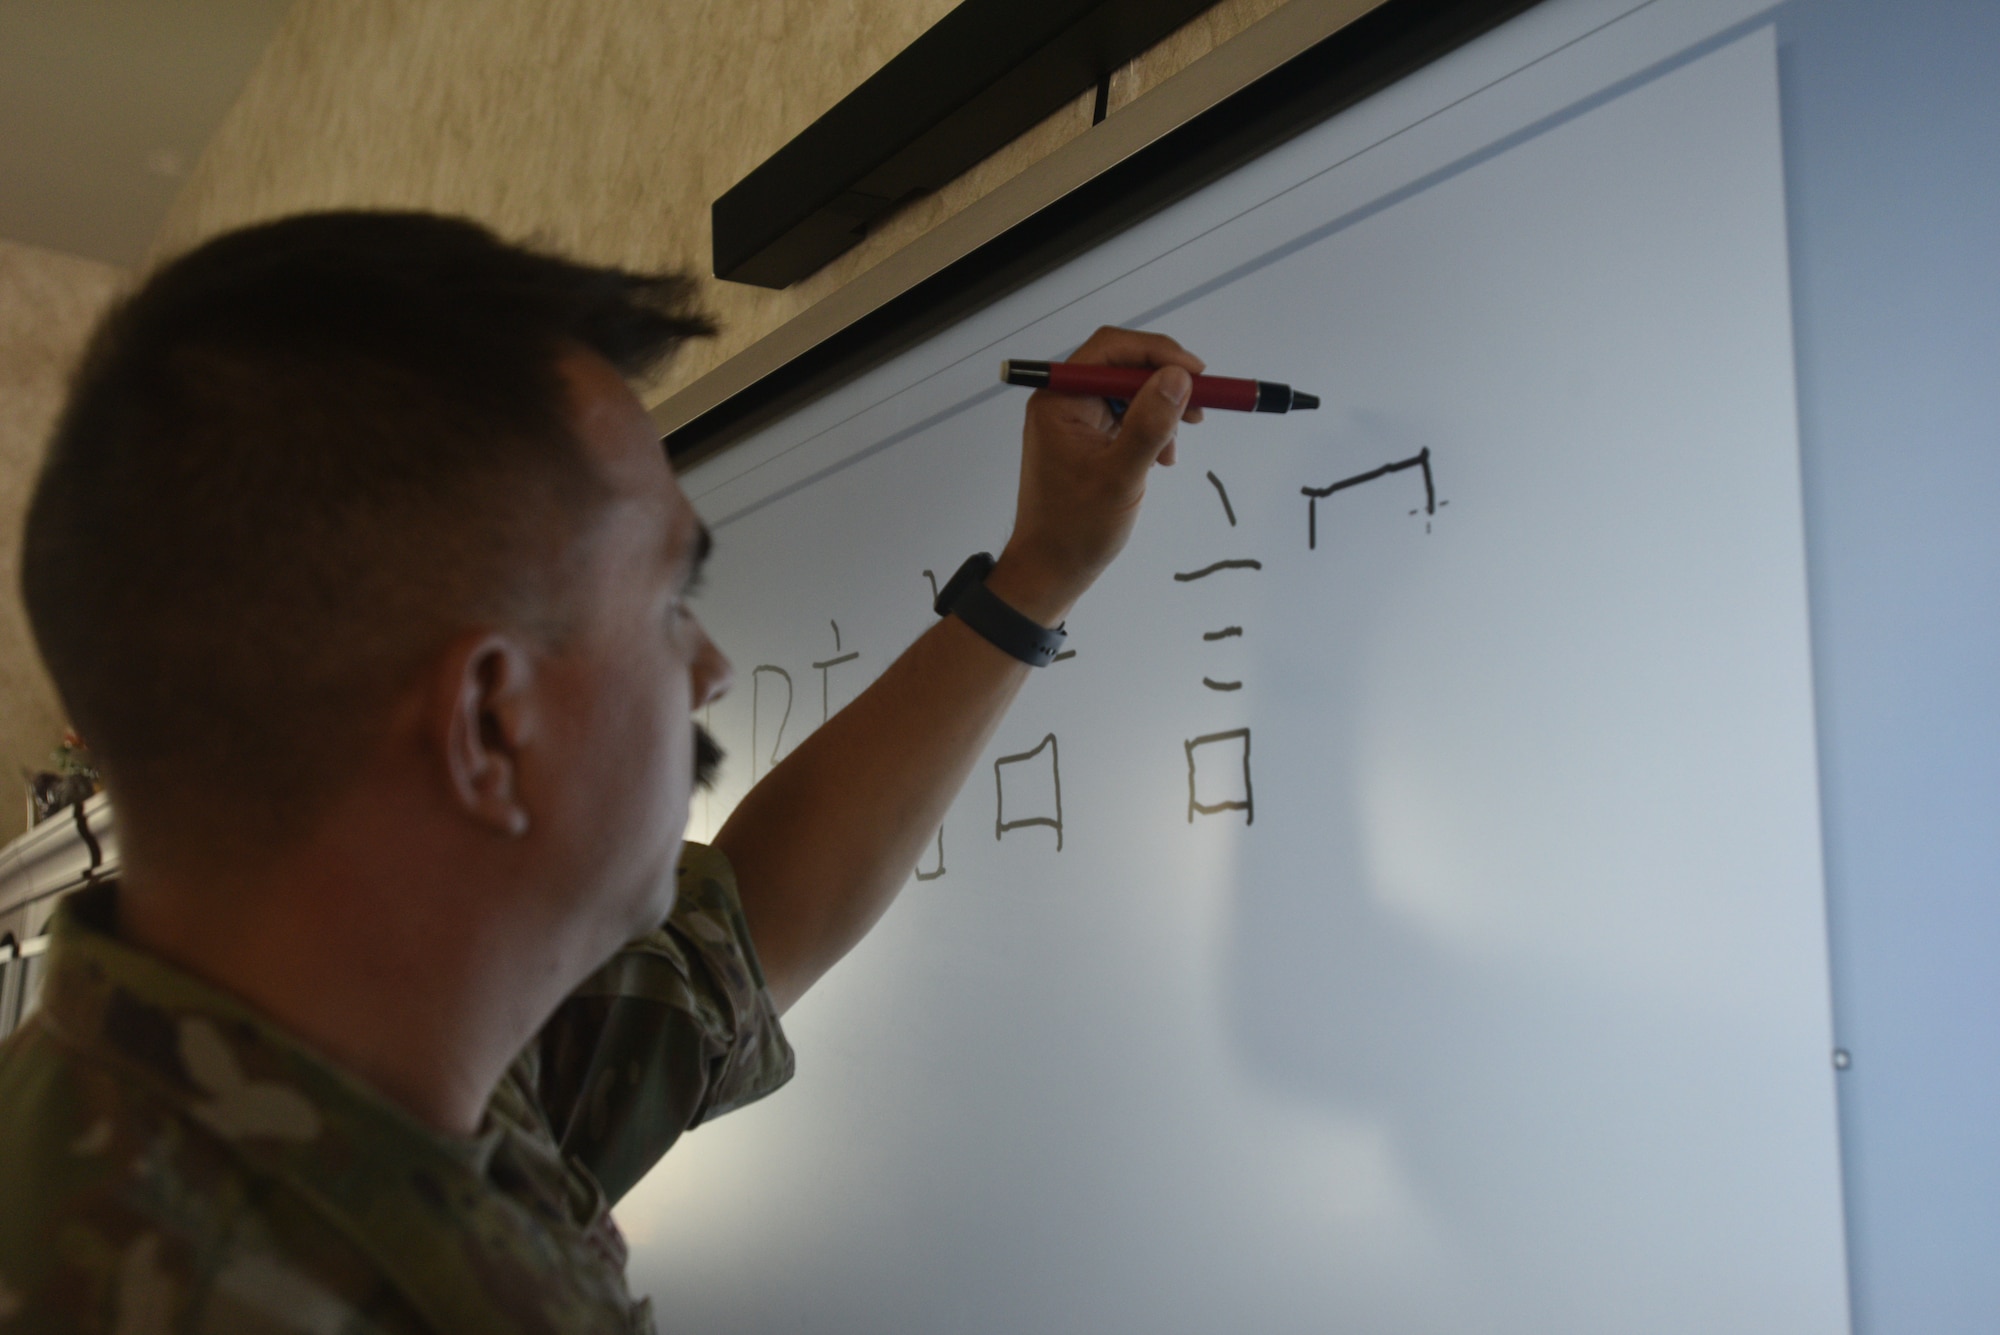 U.S. Air Force Staff Sgt. Uruwishi Holzhausen, 314th Training Squadron military language instructor, writes in Chinese mandarin on the Presidio of Monterey, California, July 21, 2021. Holzhausen spent a total of 80 weeks in class as an Airmen to learn the Chinese mandarin language. (U.S. Air Force photo by Senior Airman Ashley Thrash)